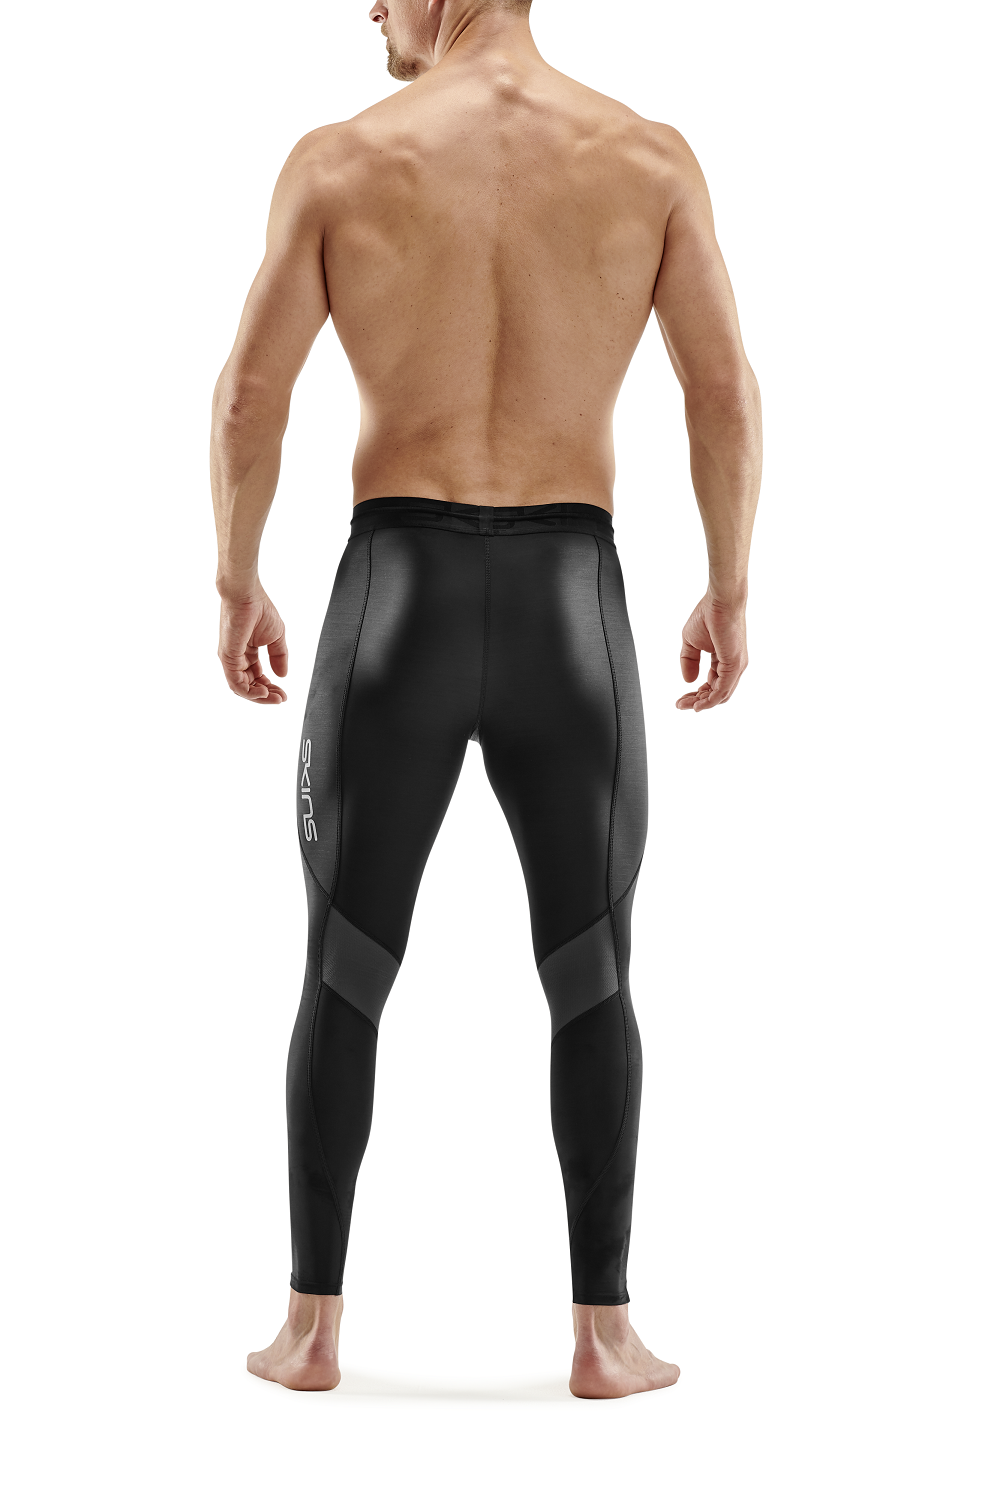 SKINS Men's Compression Recovery Long Tights 3-Series - Black/Graphite –  Key Power Sports Singapore